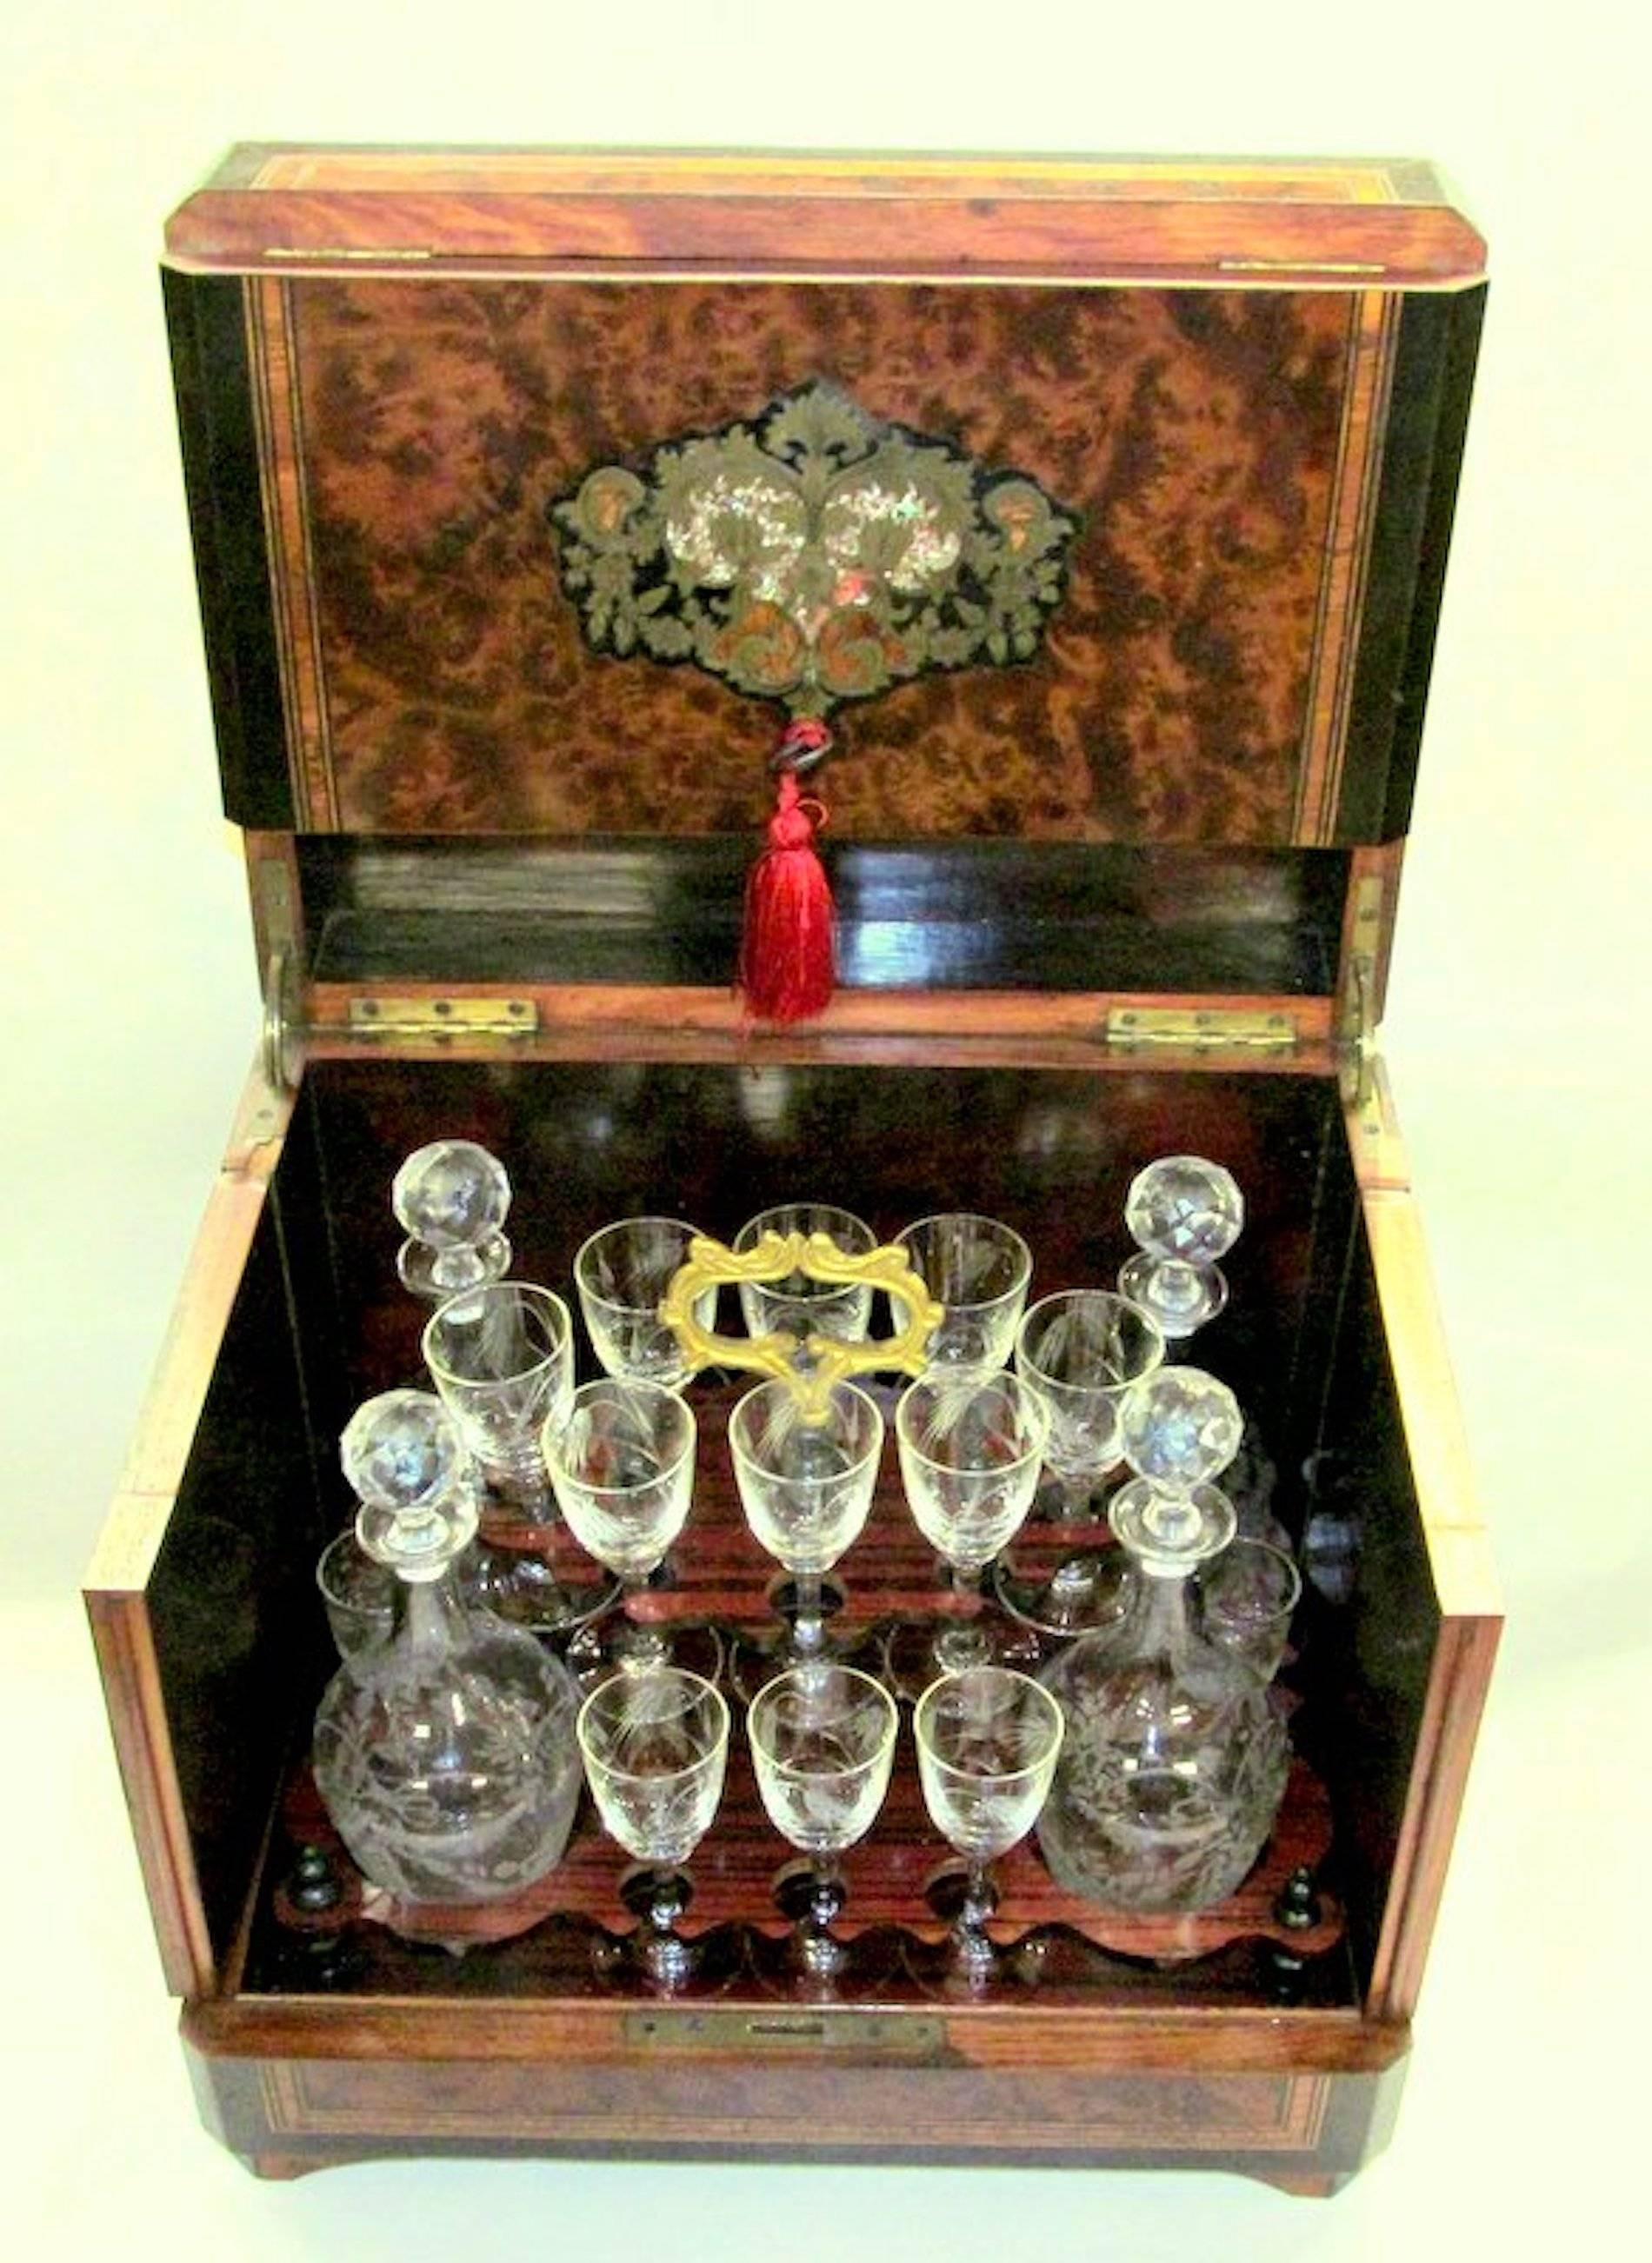 Rare and important exceptional quality antique French inlaid and ebonized amboyna and rosewood cave a' liqueur Tantalus set with engraved brass and pearl inlays with hand cut and engraved crystal decanters and glasses.

Set includes:

Four